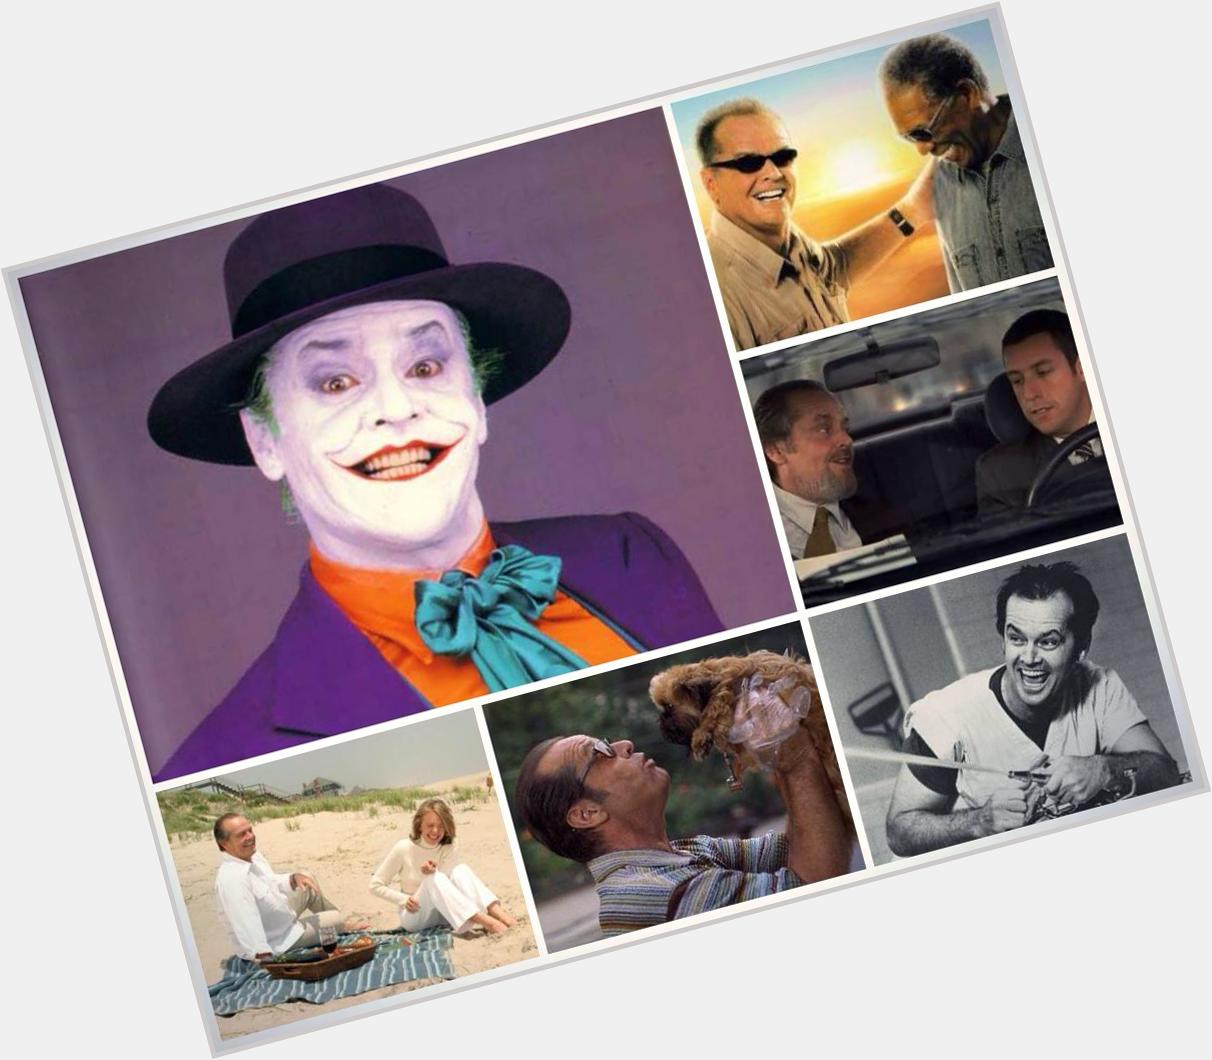 Today was born big actor in the world and for me too.From Argentina HAPPY BIRTHDAY Jack Nicholson!!  